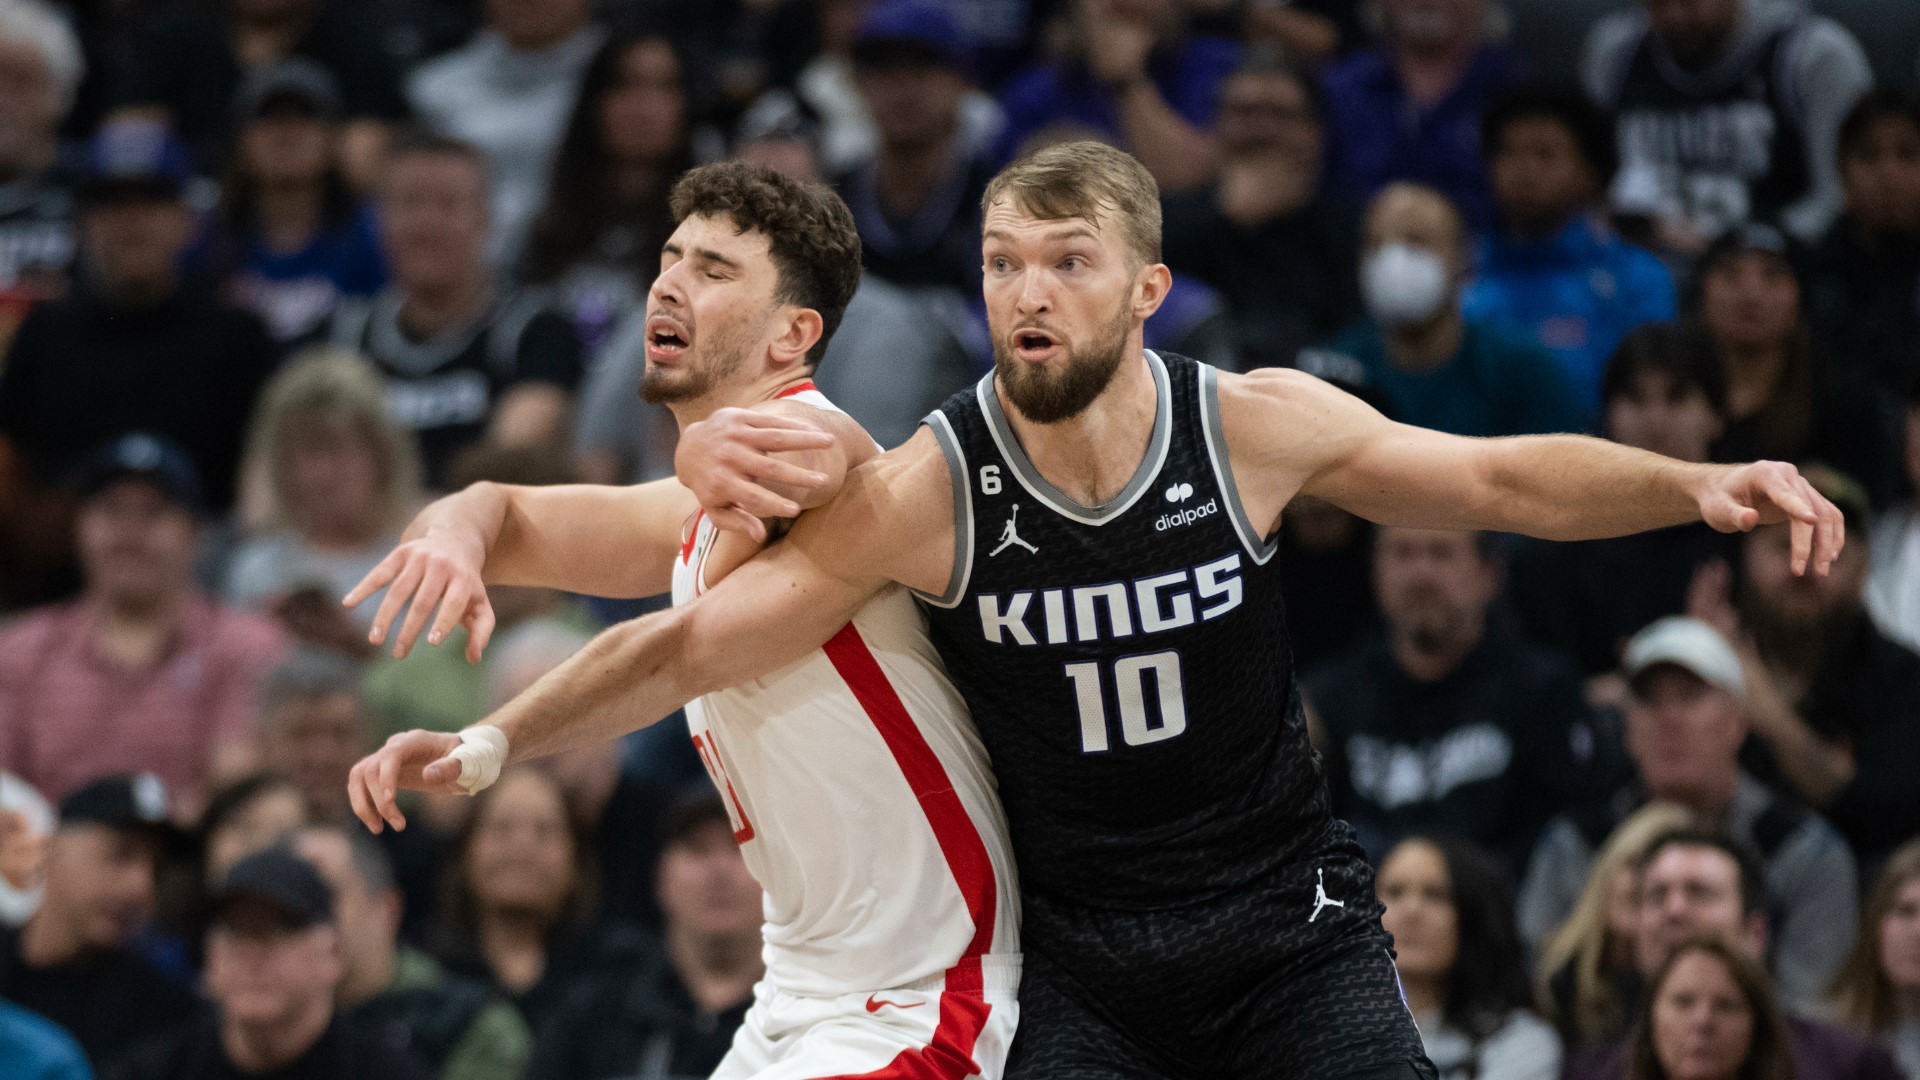 Domantas Sabonis had 25 points, 14 rebounds and nine assists as the Sacramento Kings beat the skidding Houston Rockets 135-115 on Wednesday night.